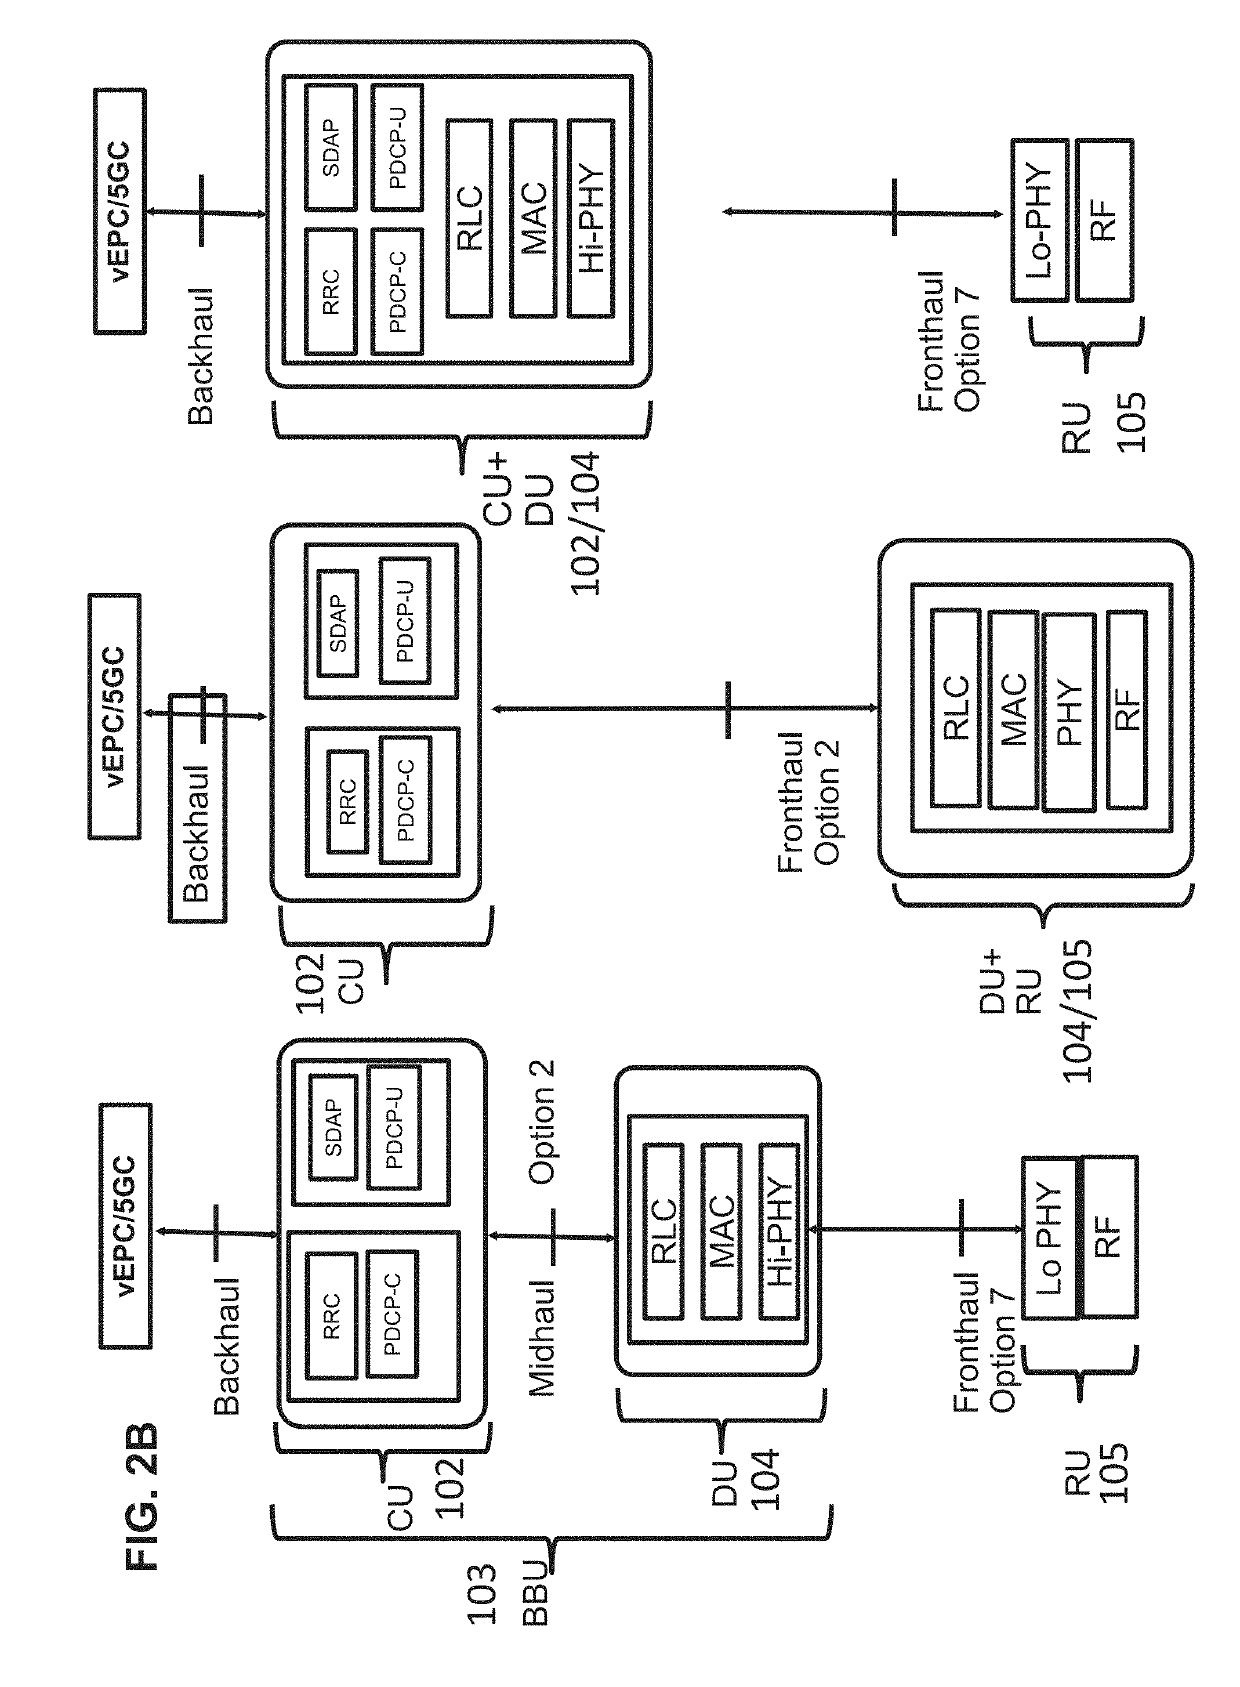 System and method for reduction in fronthaul interface bandwidth for cloud ran